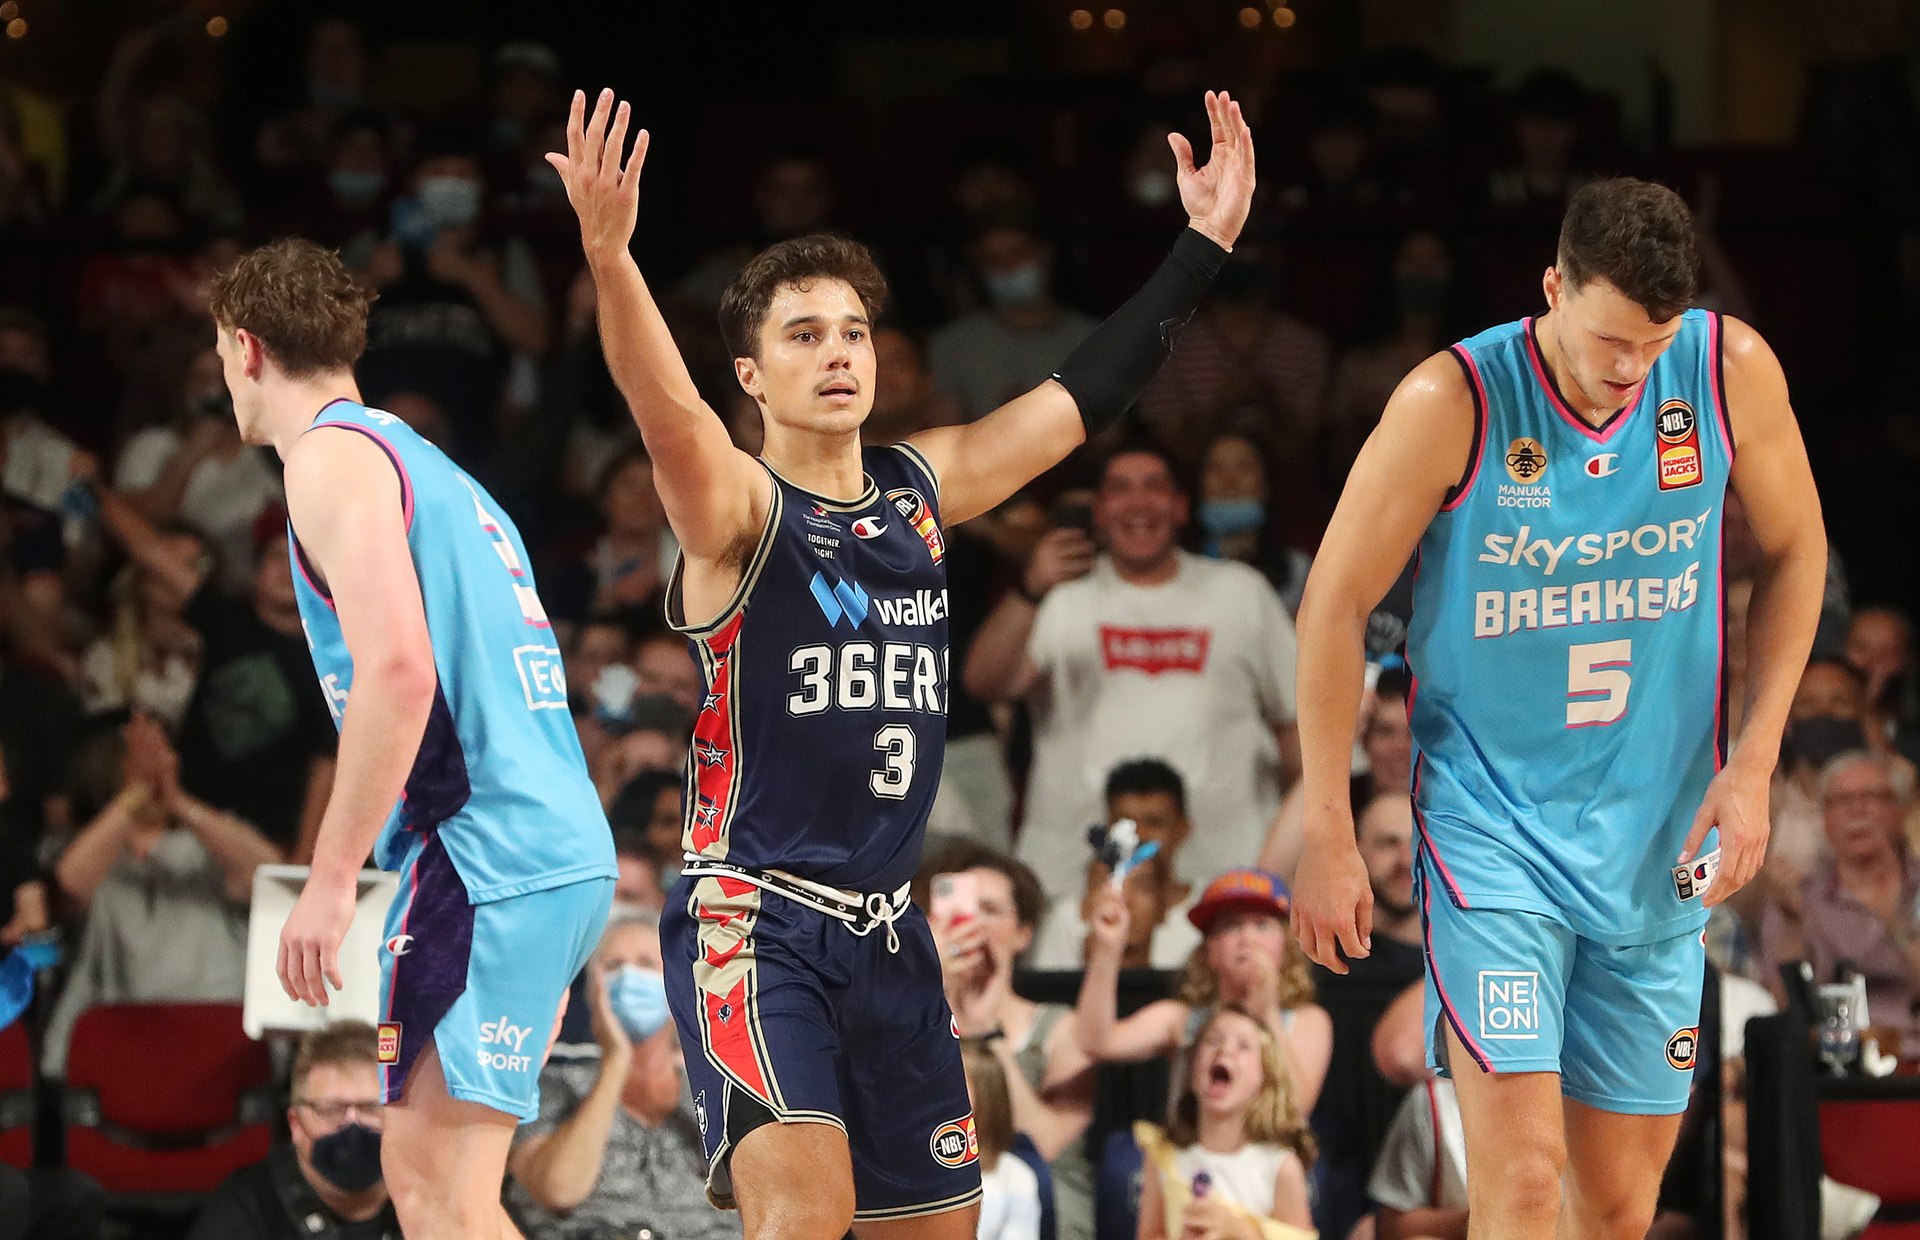 Basketball New Zealand Breakers fall to Adelaide 36ers after second-half collapse